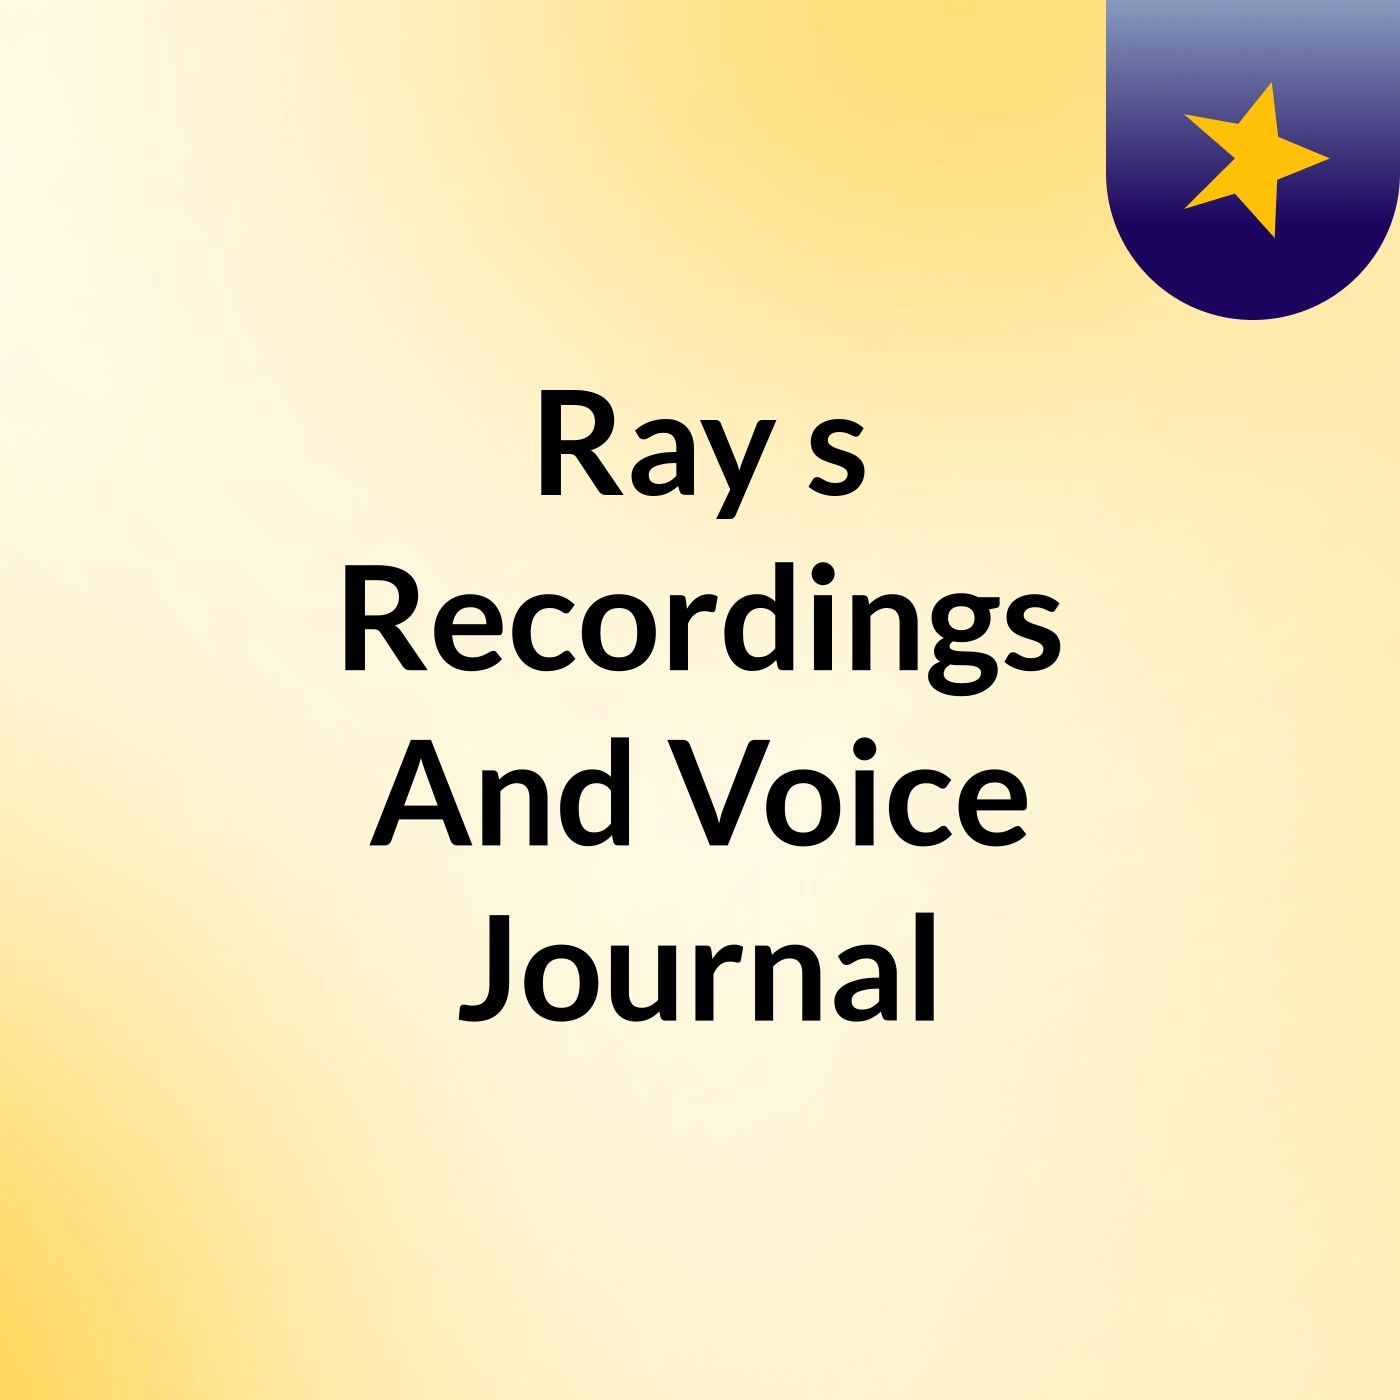 Ray's Recordings And Voice Journal